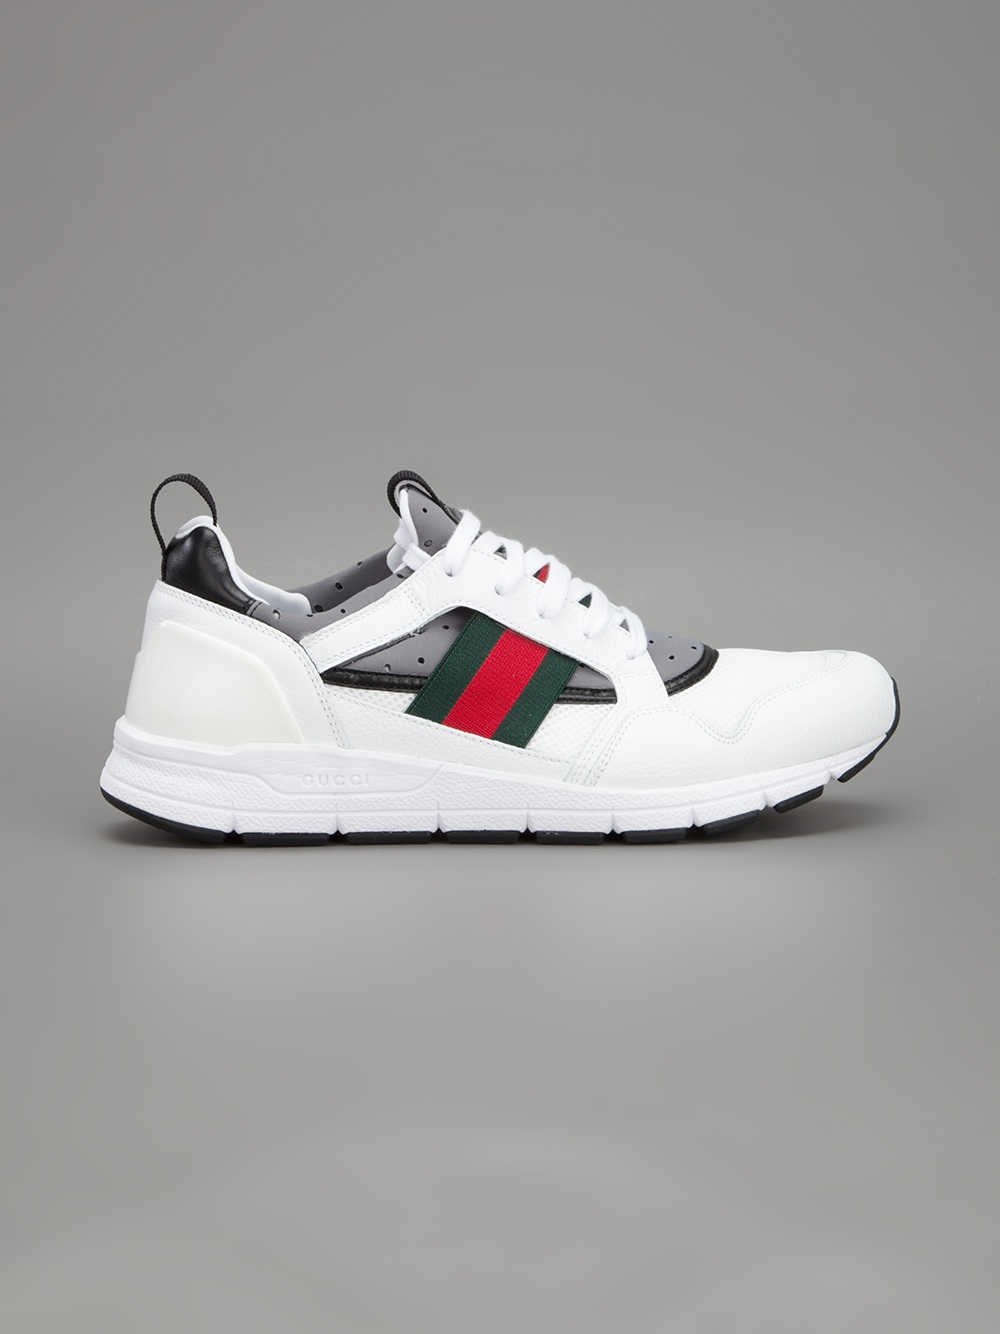 gucci mens running shoes, OFF 79%,Buy!